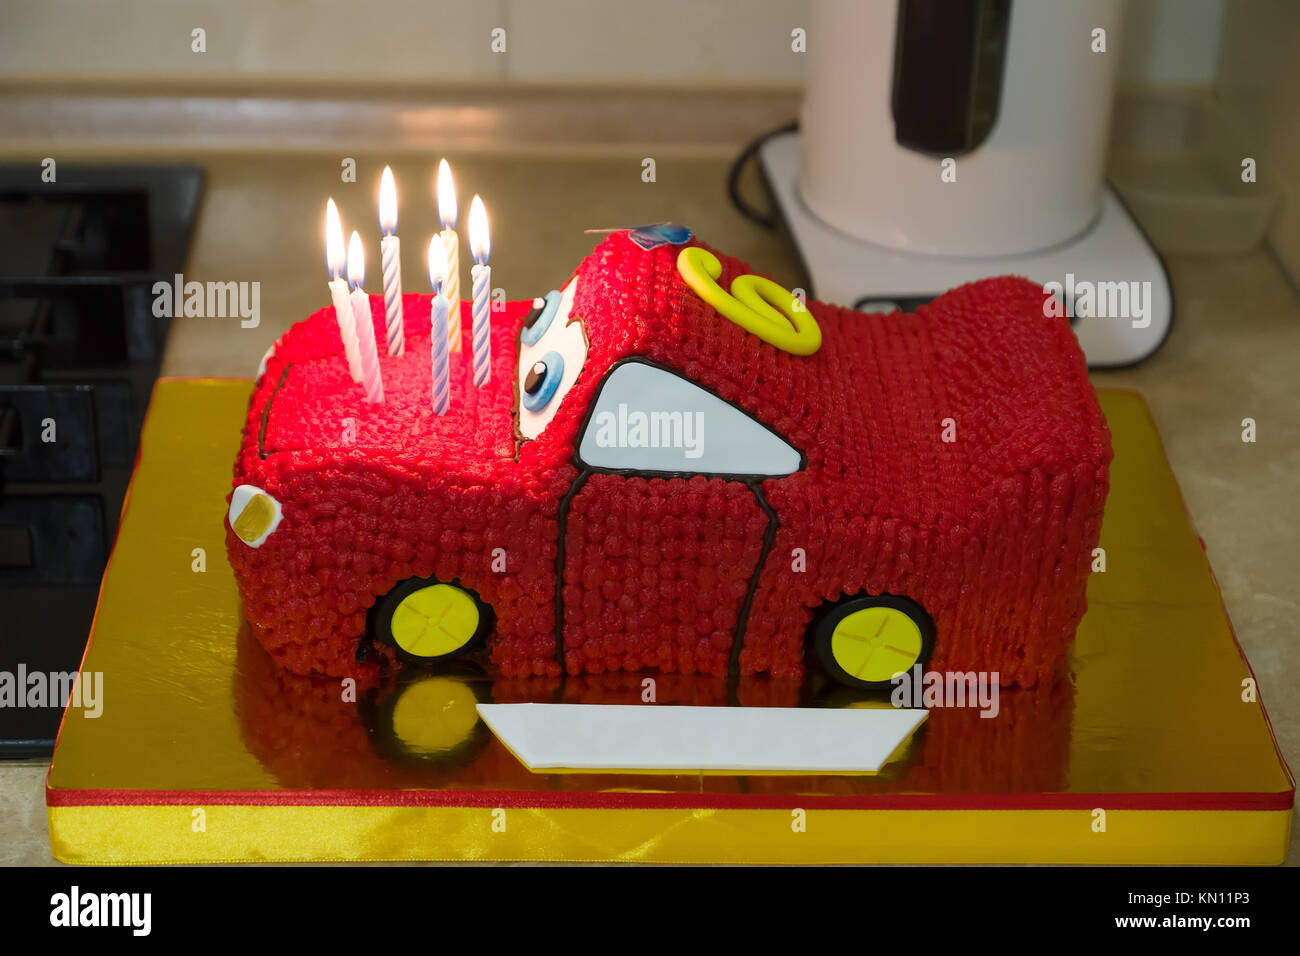 Birthday Cake Made In The Form Of A Sports Car With Candles Stock Photo Alamy